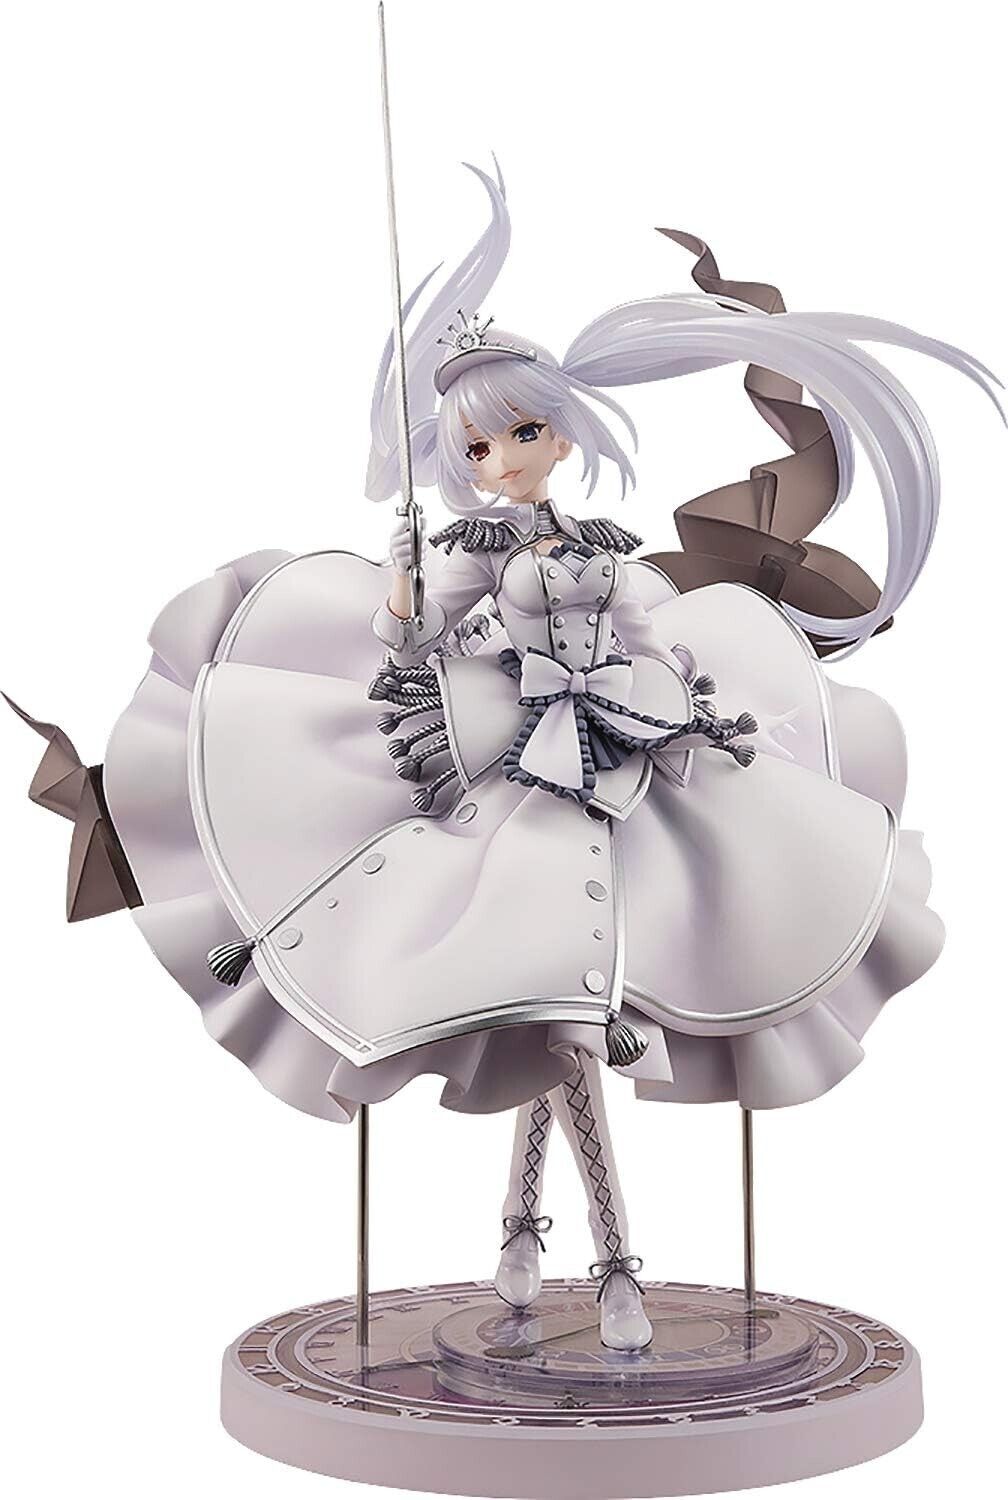 Kadokawa KDcolle Date a Bullet White Queen 1/7 Scale Figure Anime Toy From Japan